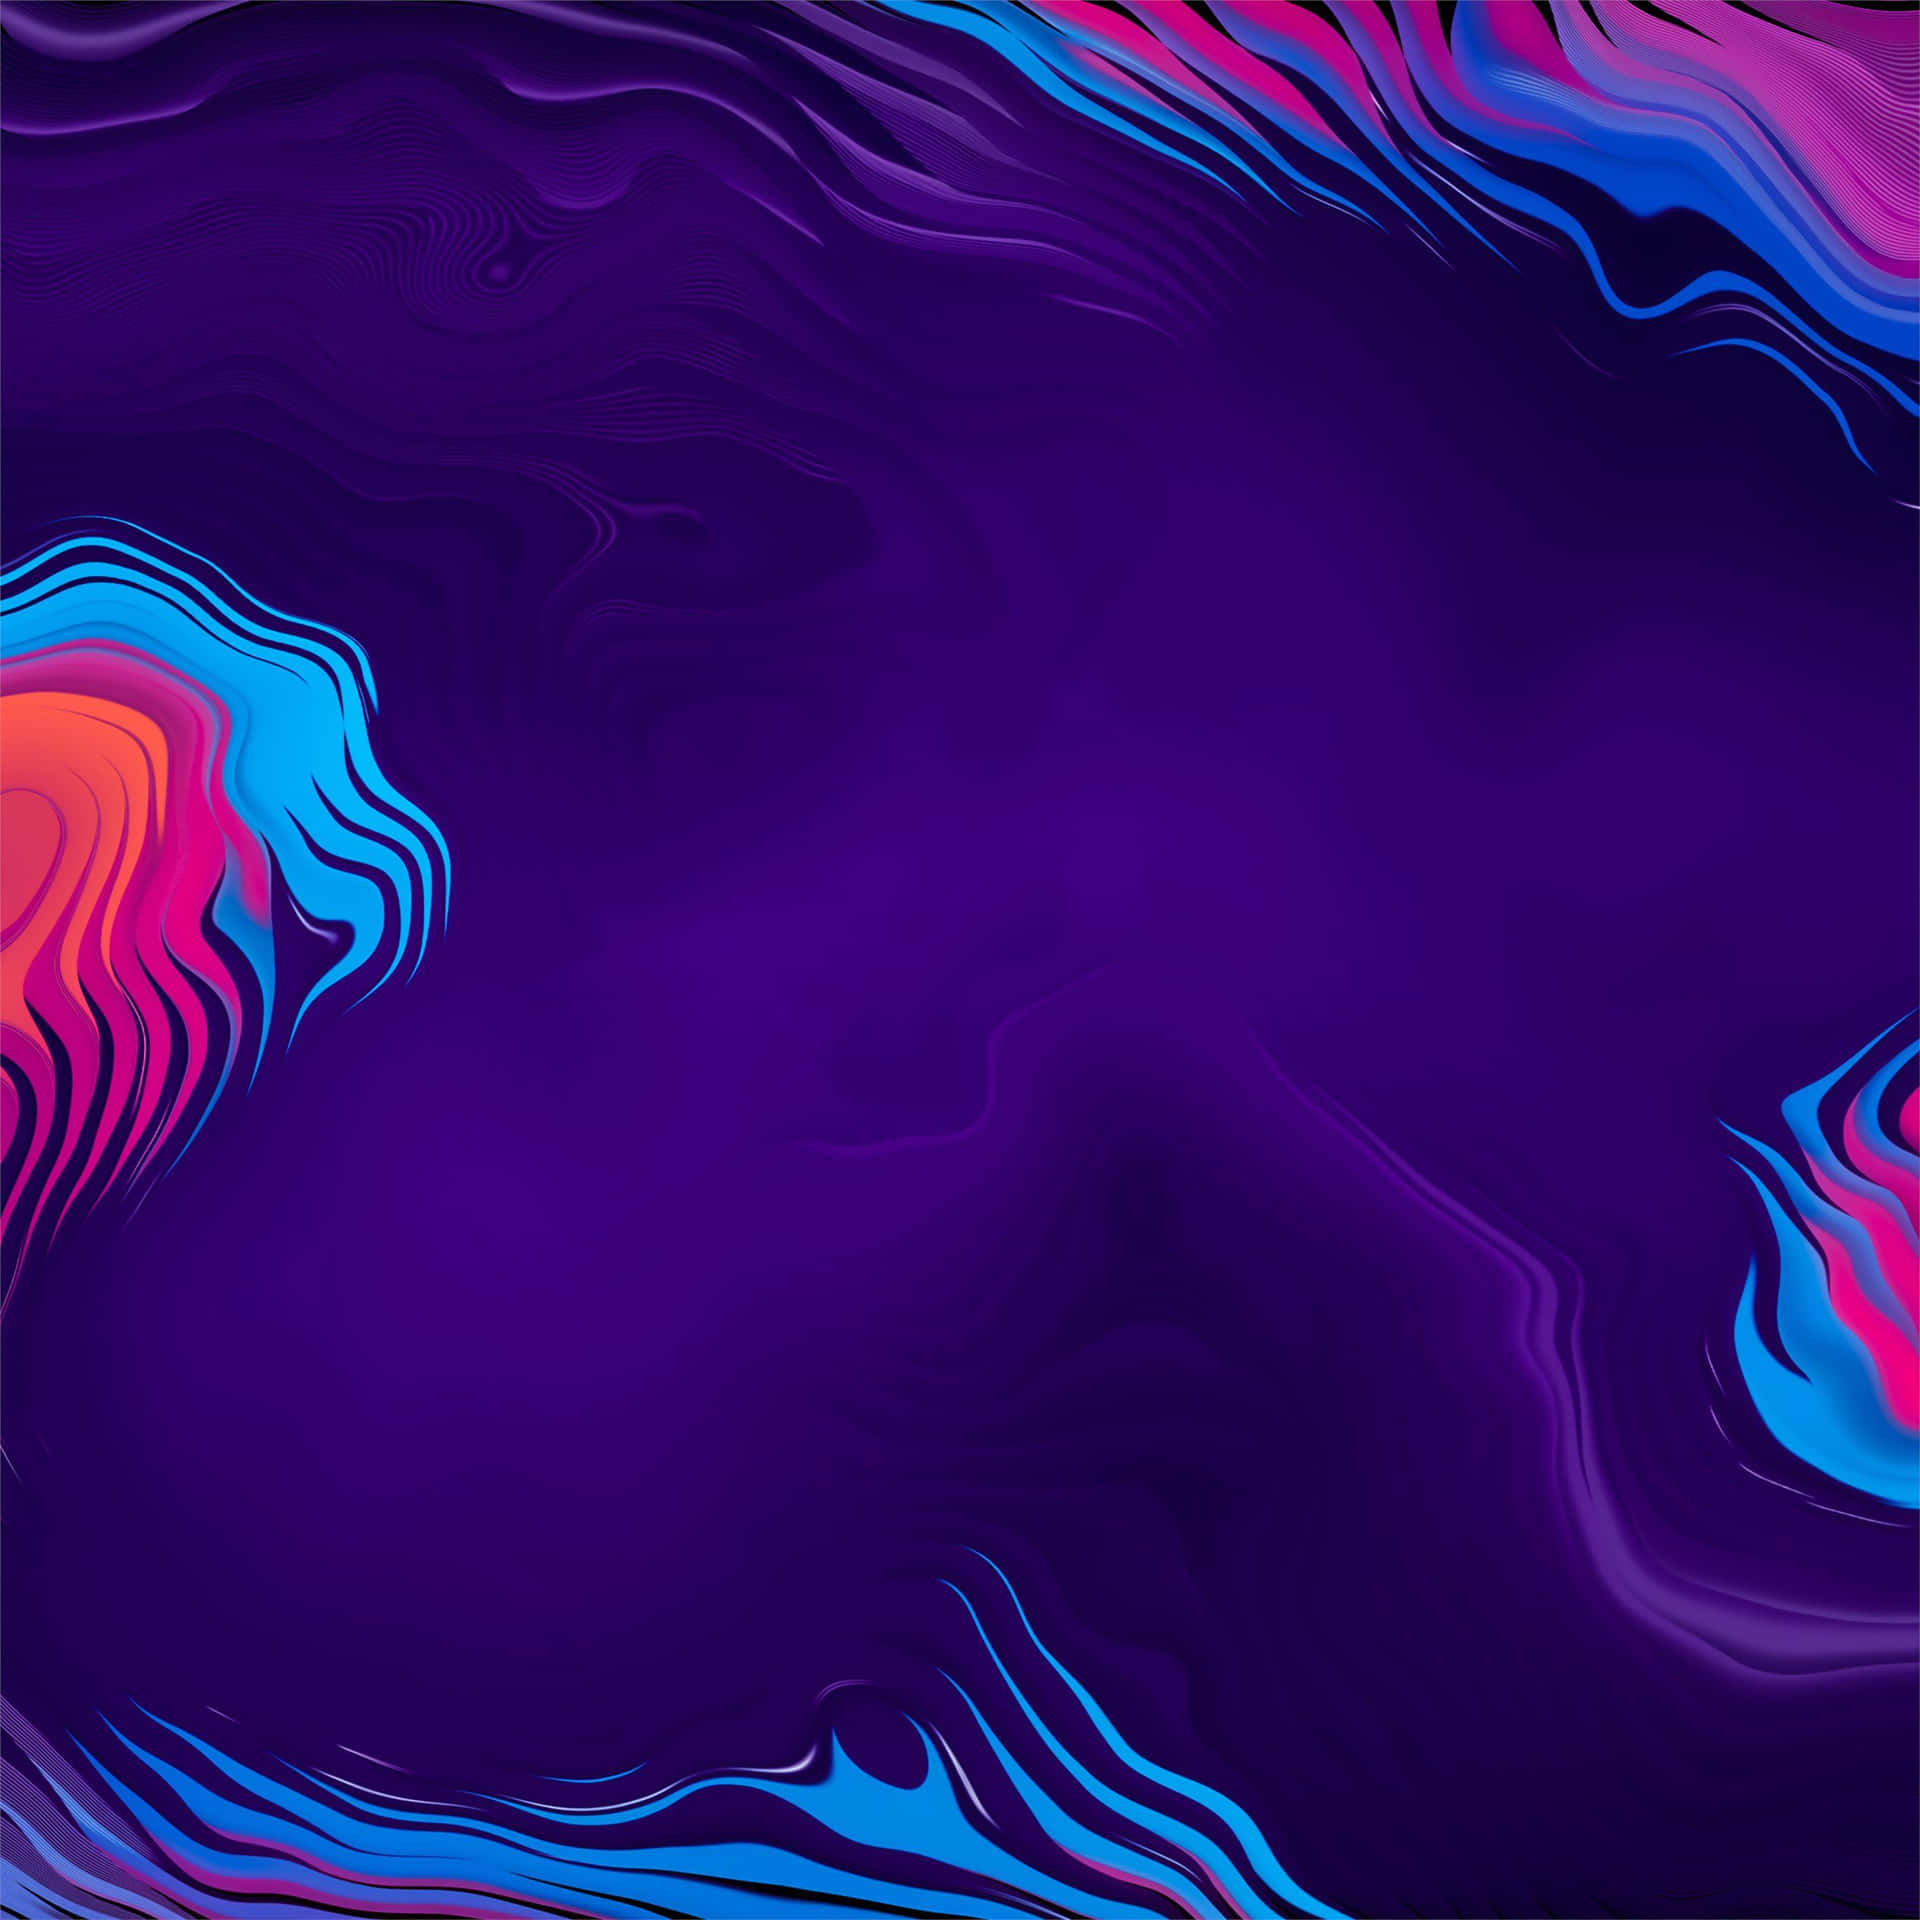 Colorful Abstract Art Waves On Purple Background